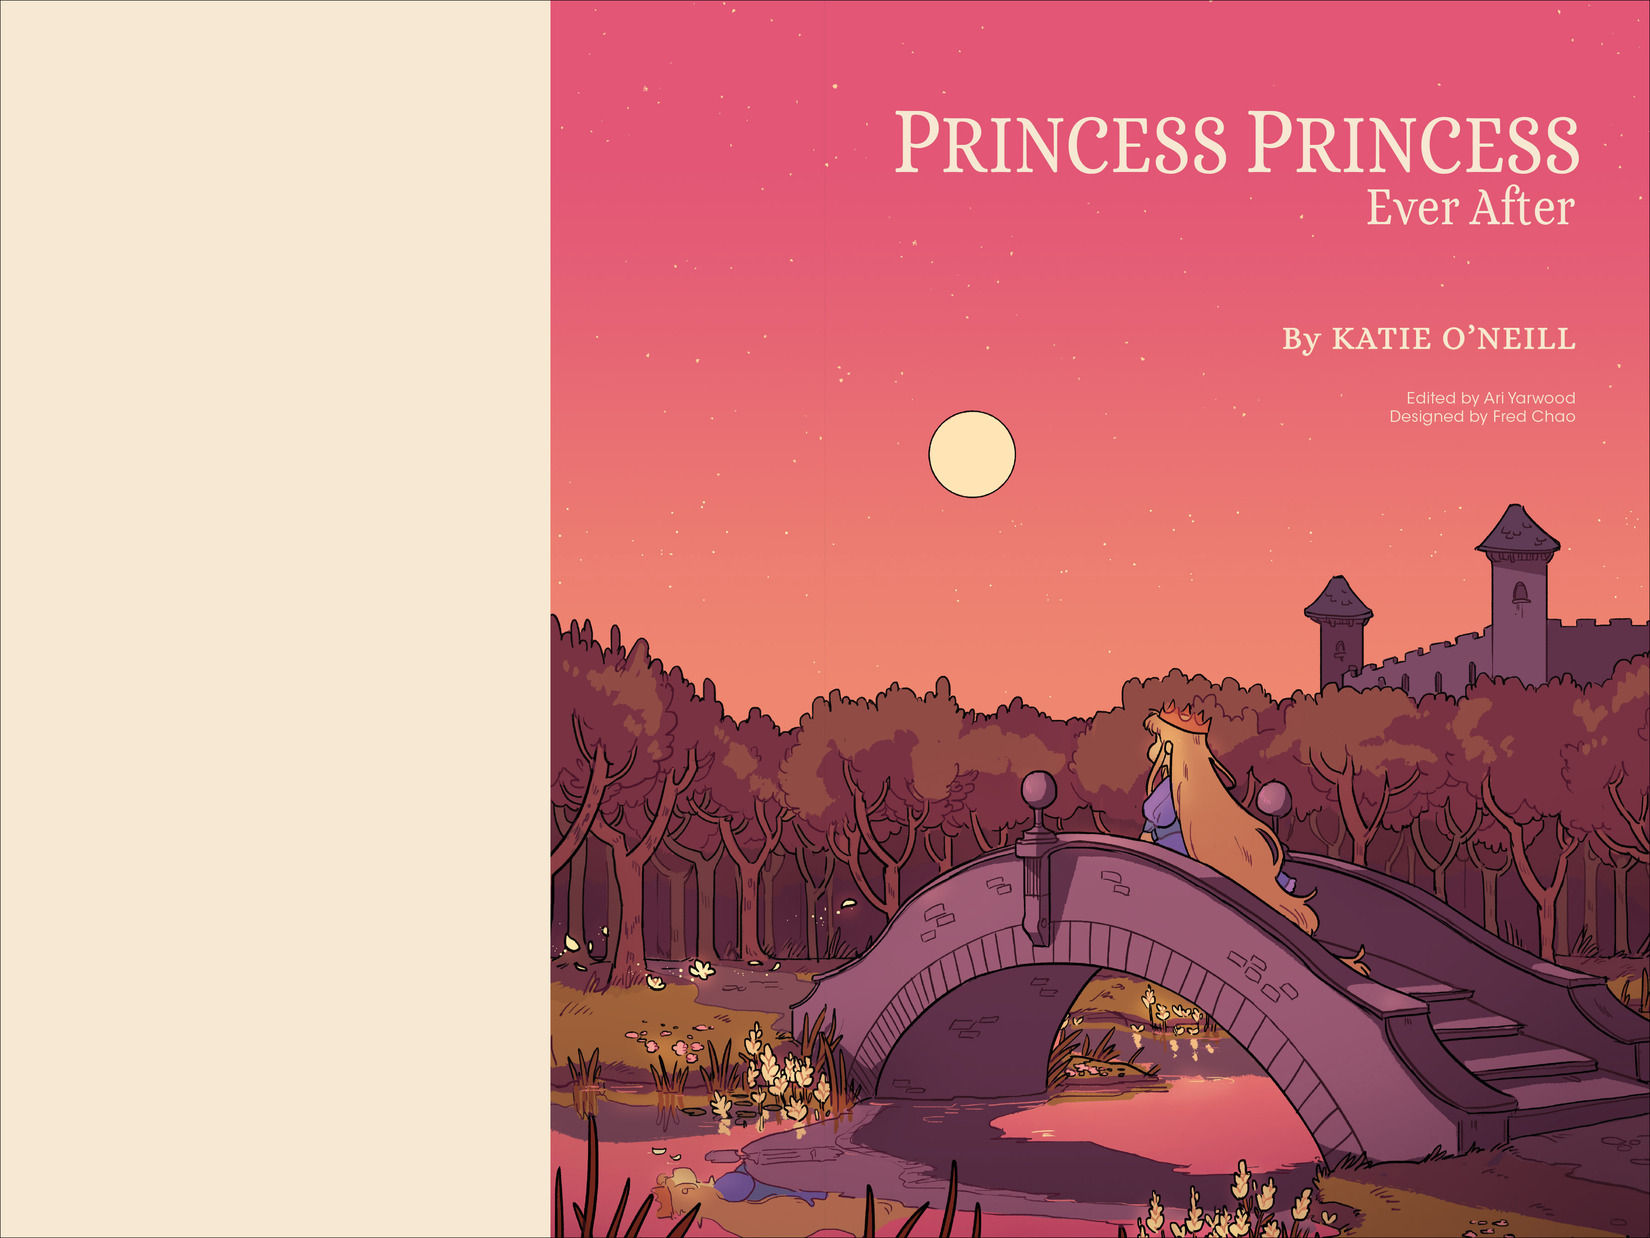 Read online Princess Princess Ever After comic -  Issue # Full - 4